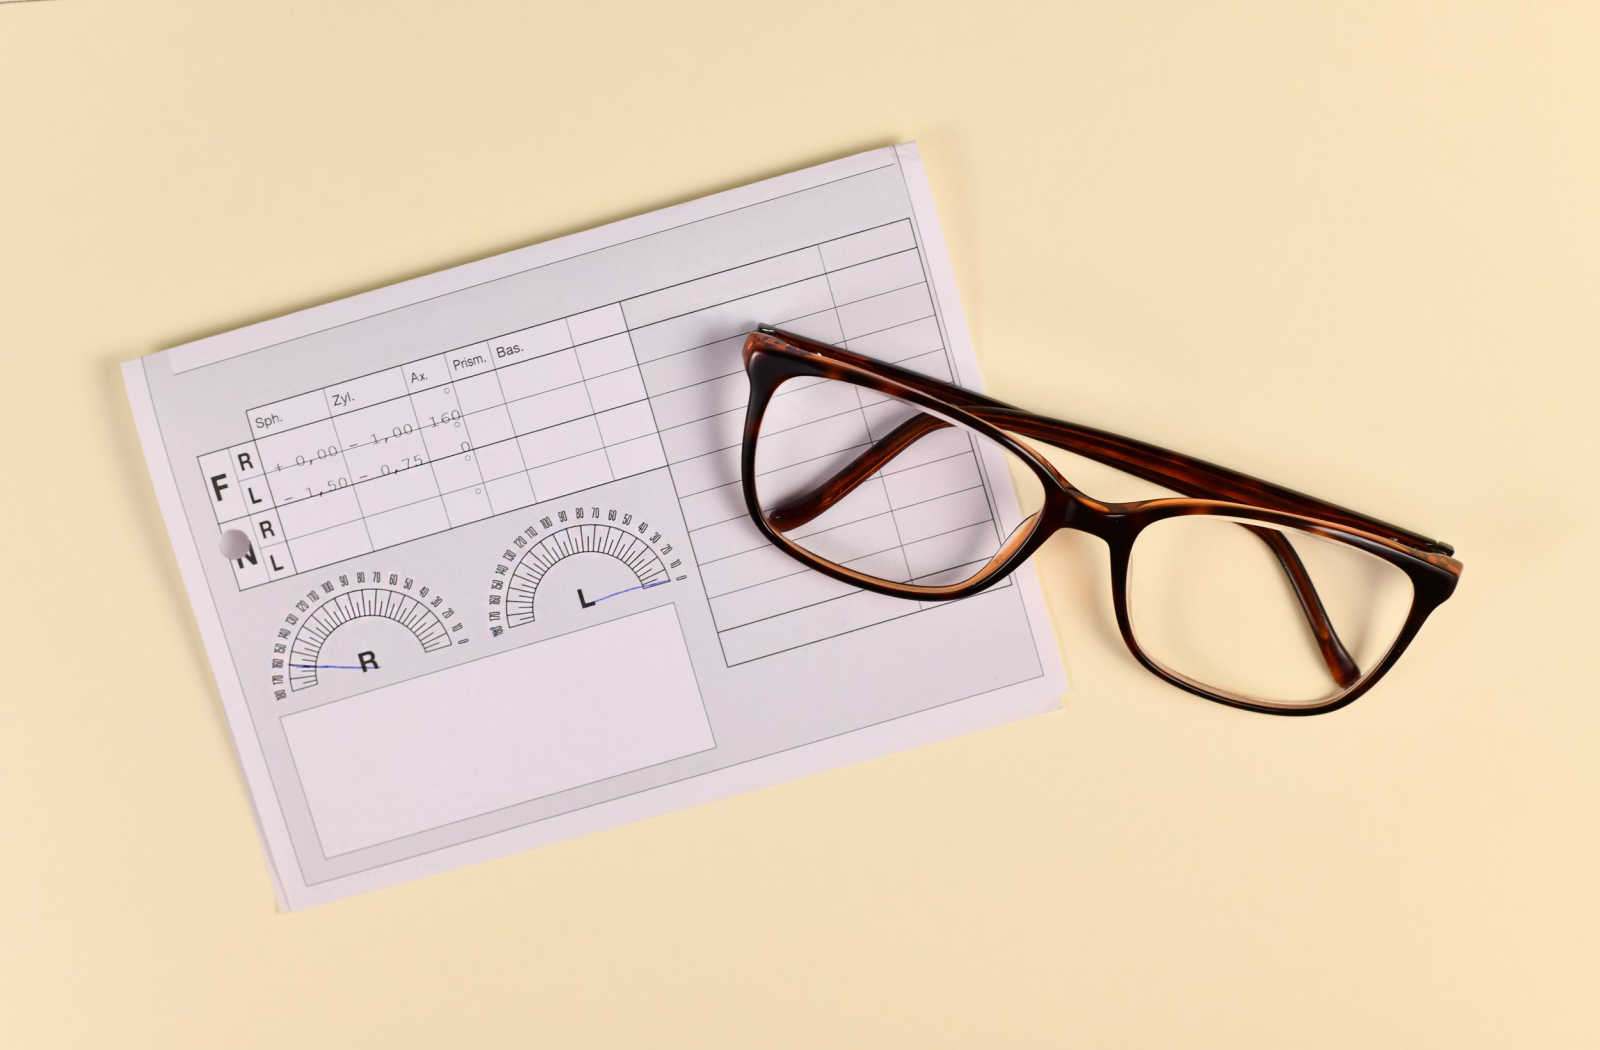 Pair of glasses and a prescription lens sheet on a yellow background.